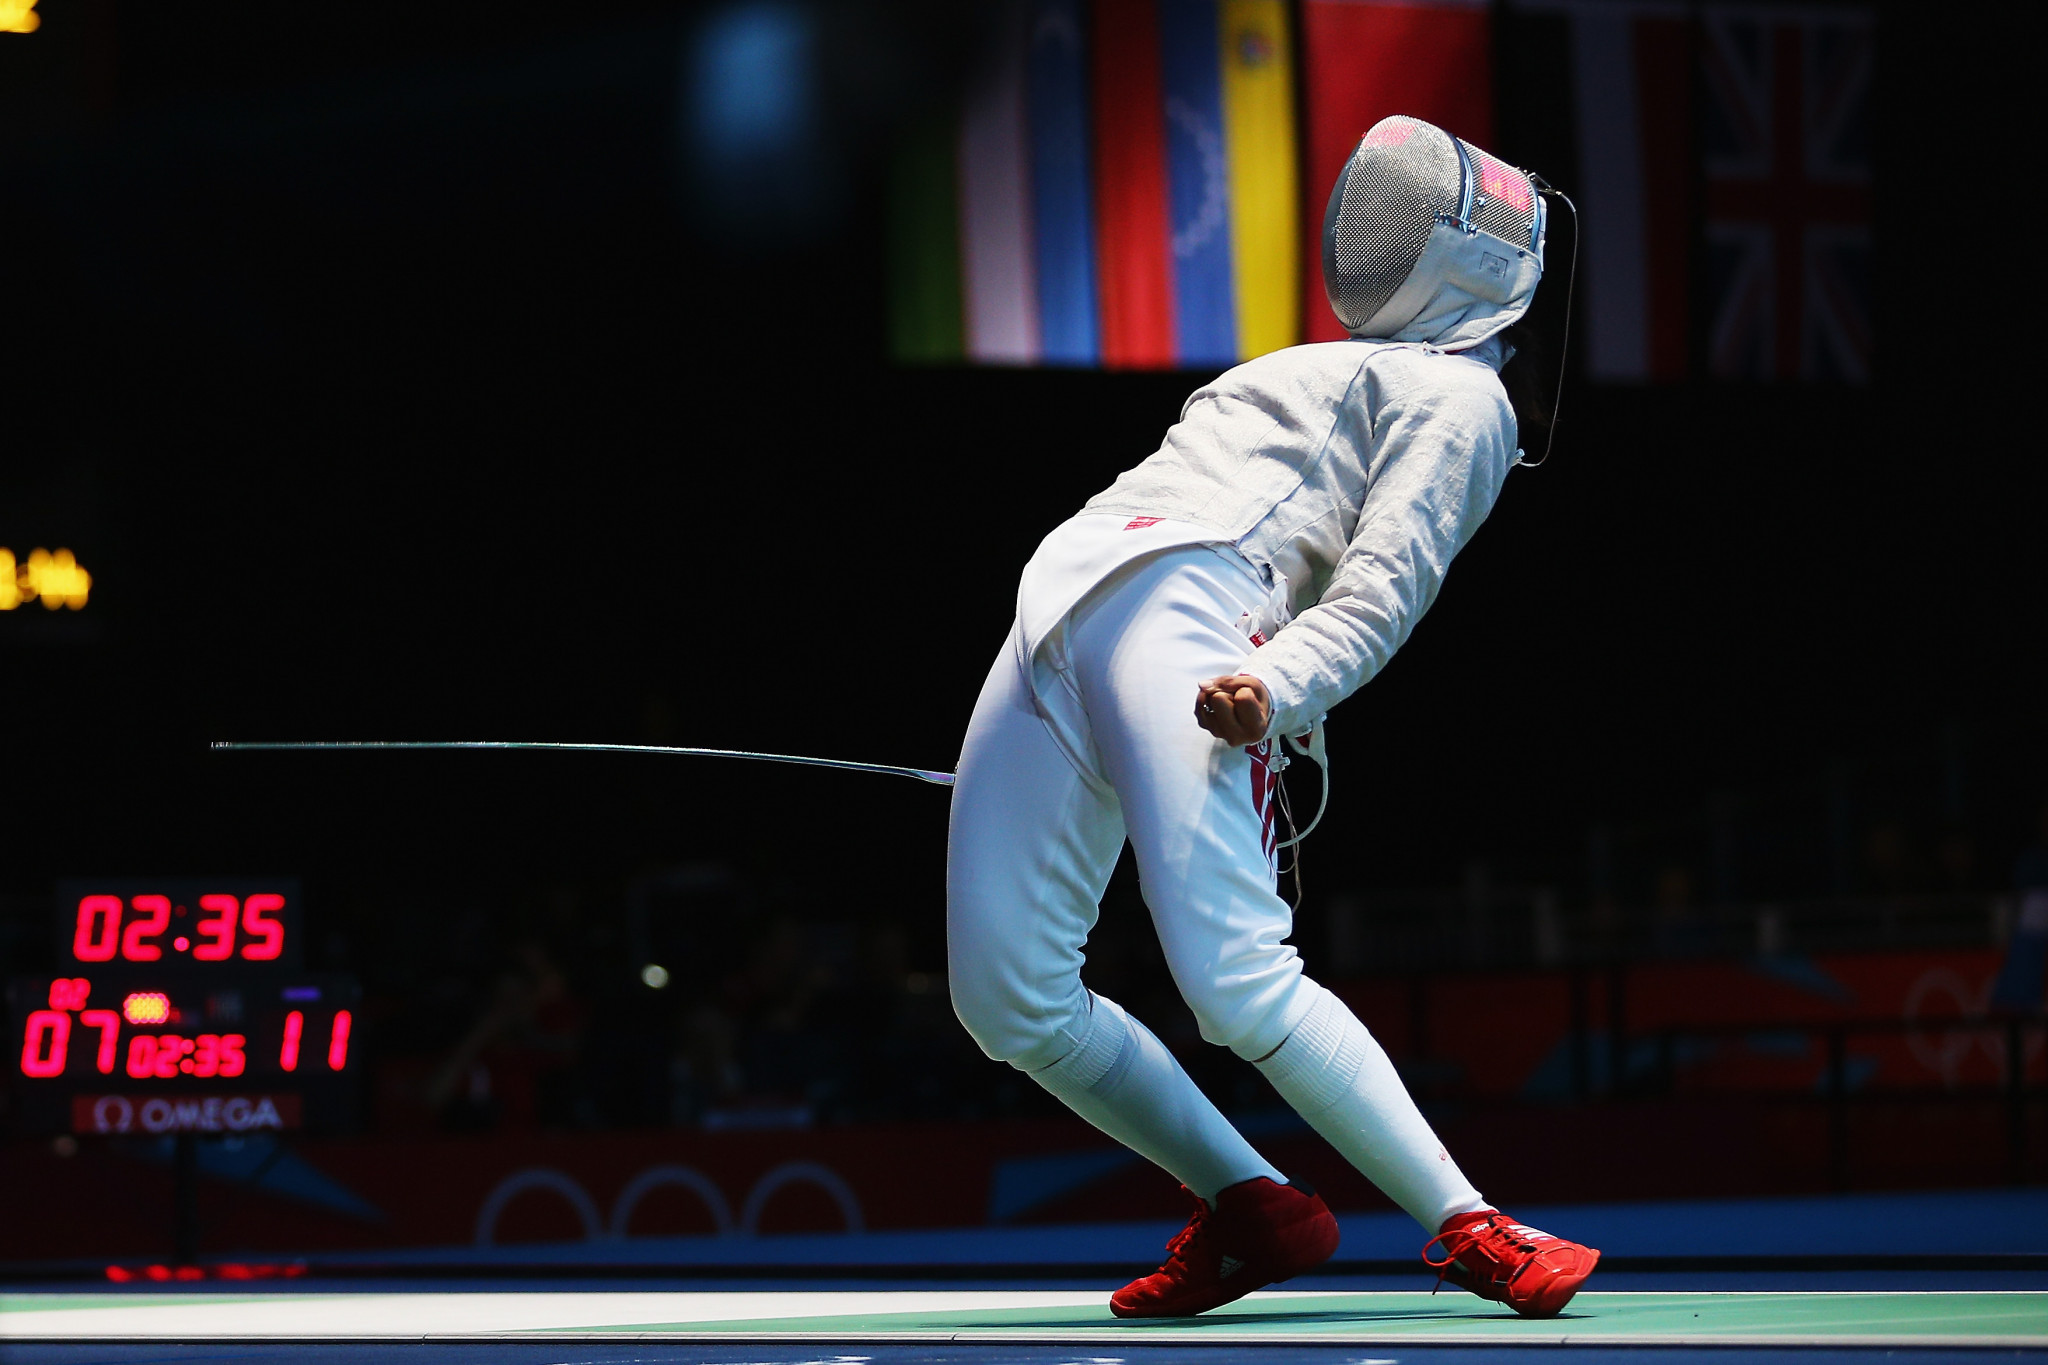 Besbes winning streak ends at African Fencing Championships as compatriot claims women's sabre title